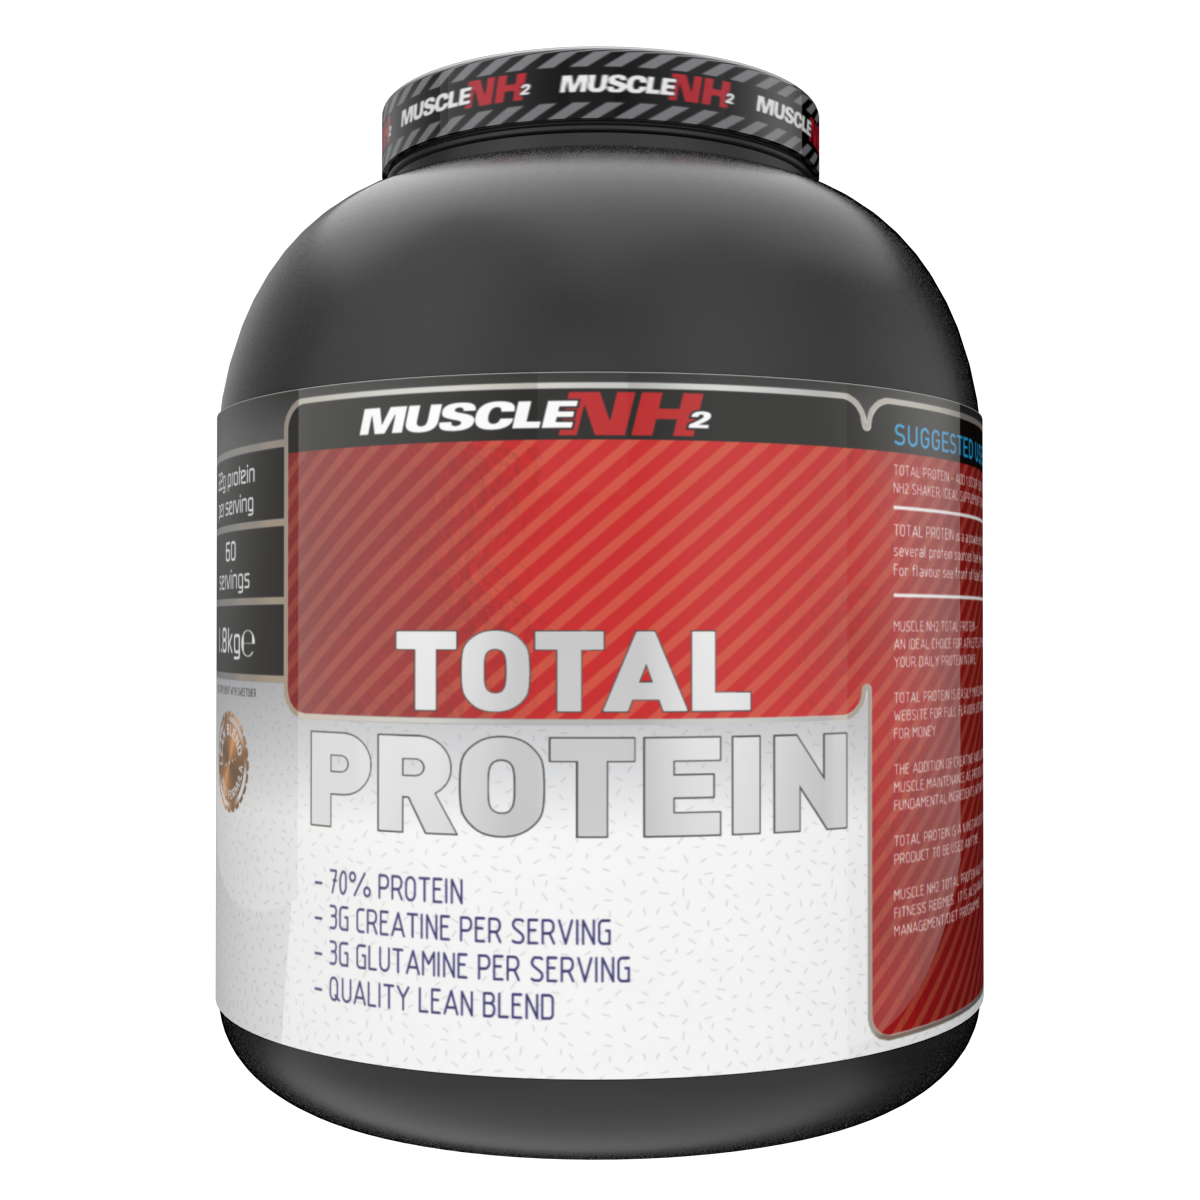 MuscleNH2 Total Protein